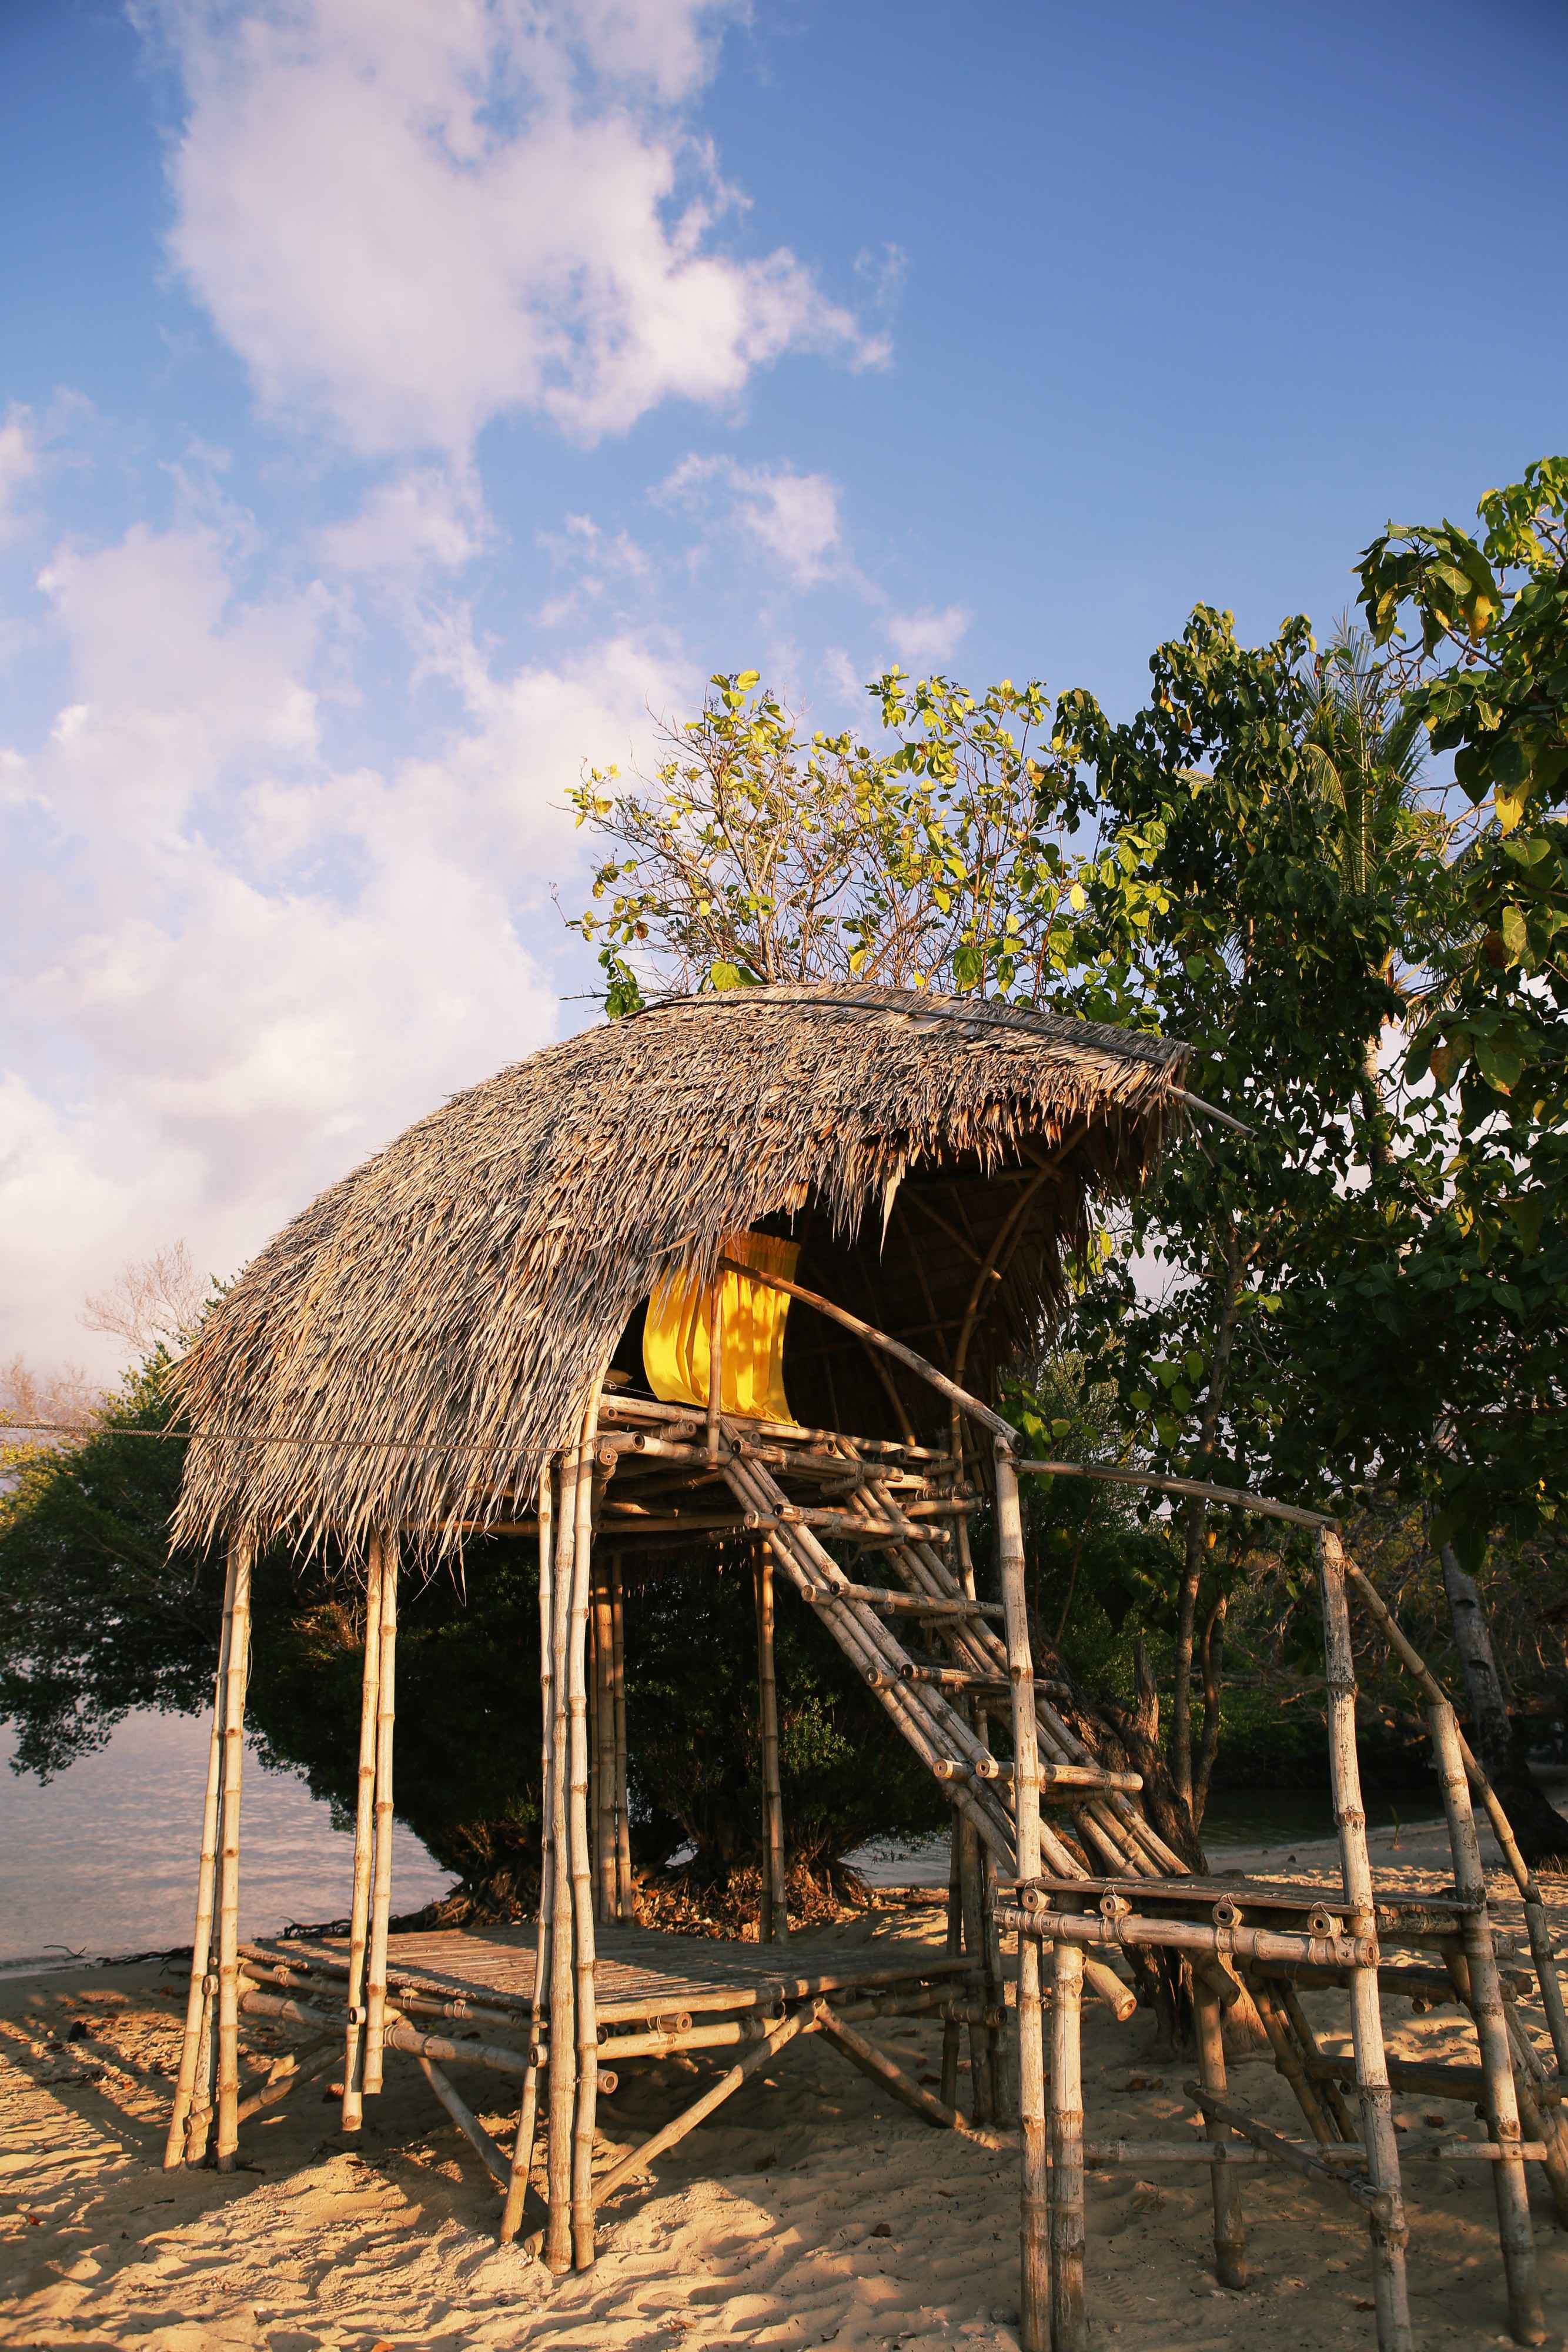 One of the highlights is sleeping in the Tuka huts, the simple yet elegant bamboo structures that have become Tao’s signature lodging. Going to sleep beneath the open, airy Tukas and waking up to the sight of the sea, was paradise.